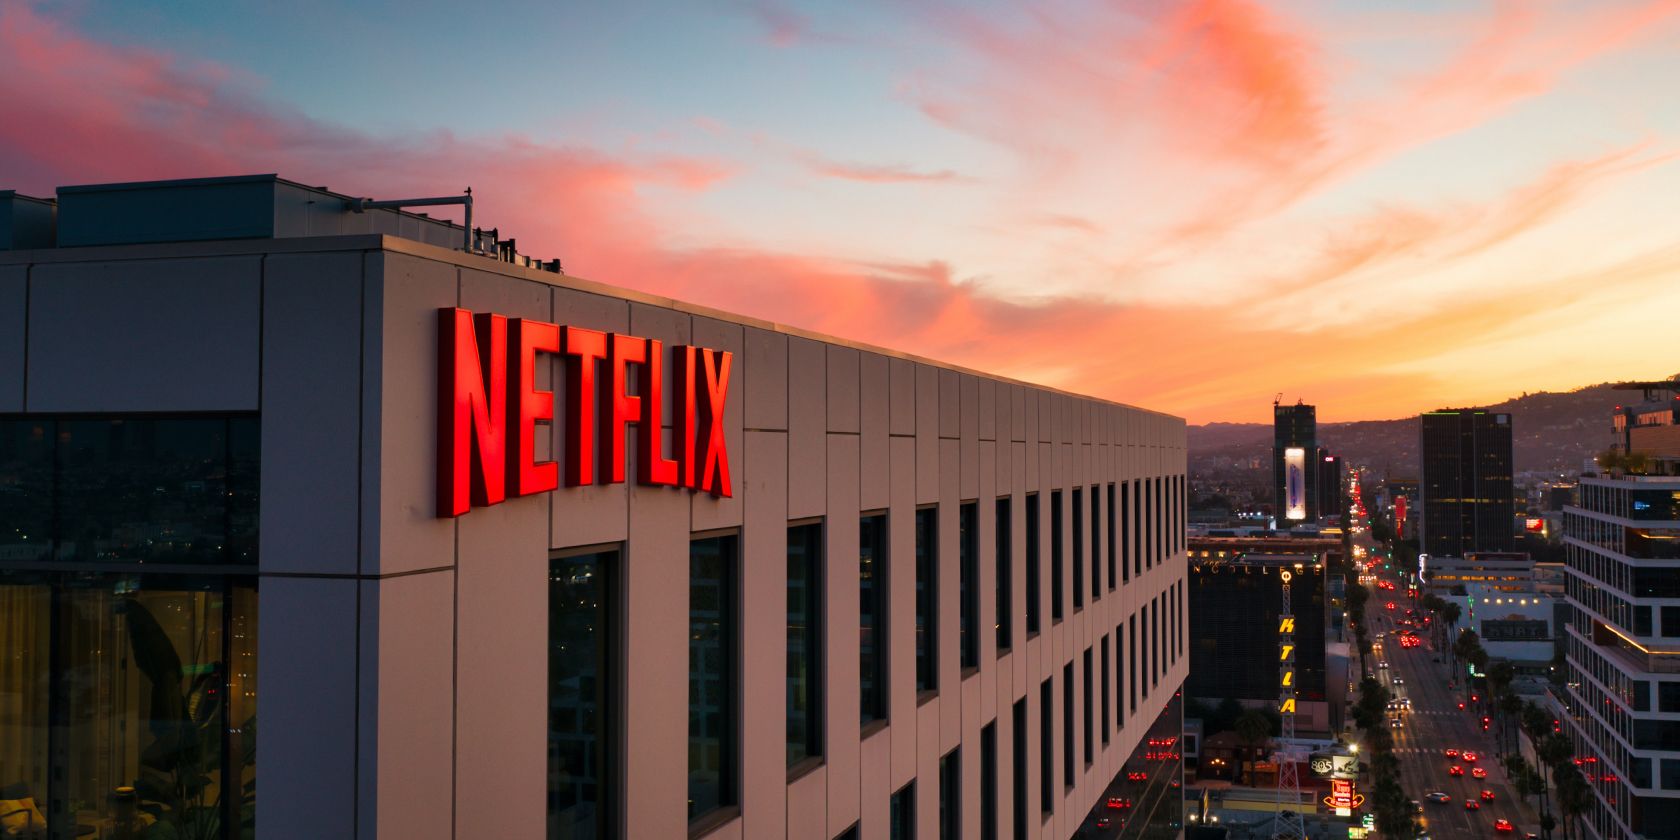 The exterior of a Netflix office building.